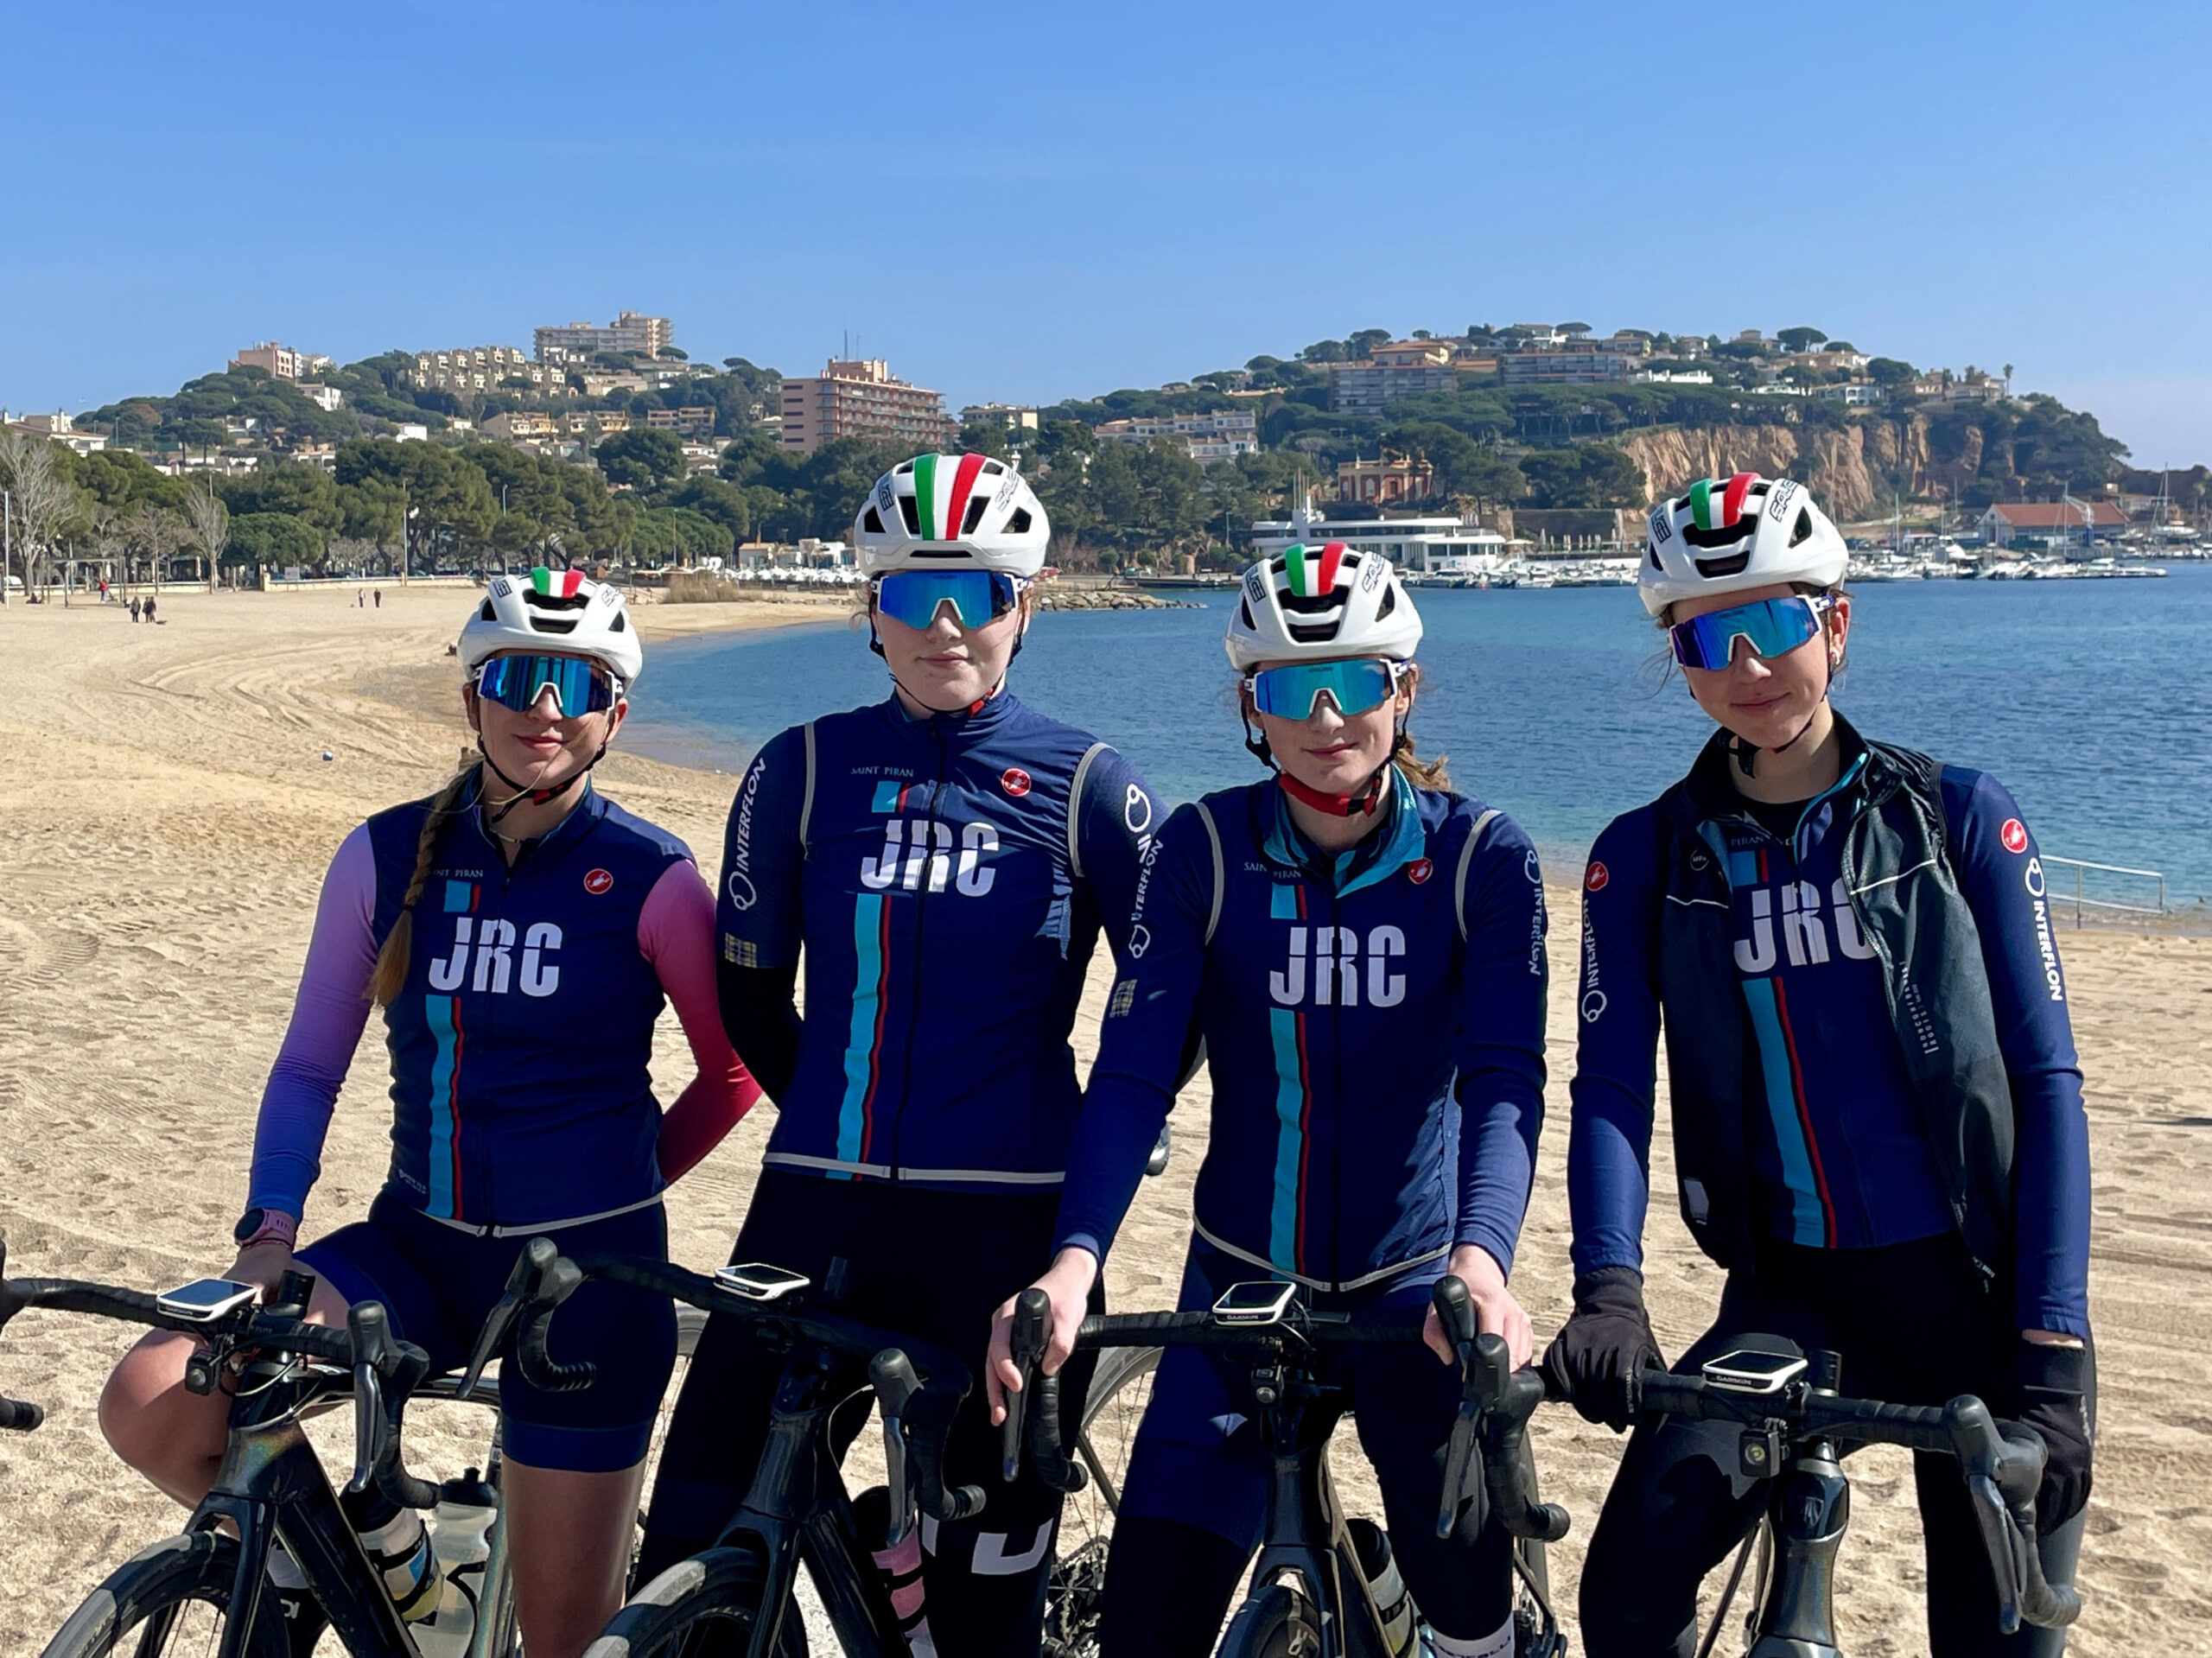 Four riders from the JRC Women's Junior Cycling team standing over their bikes in front of a Spanish coastline.